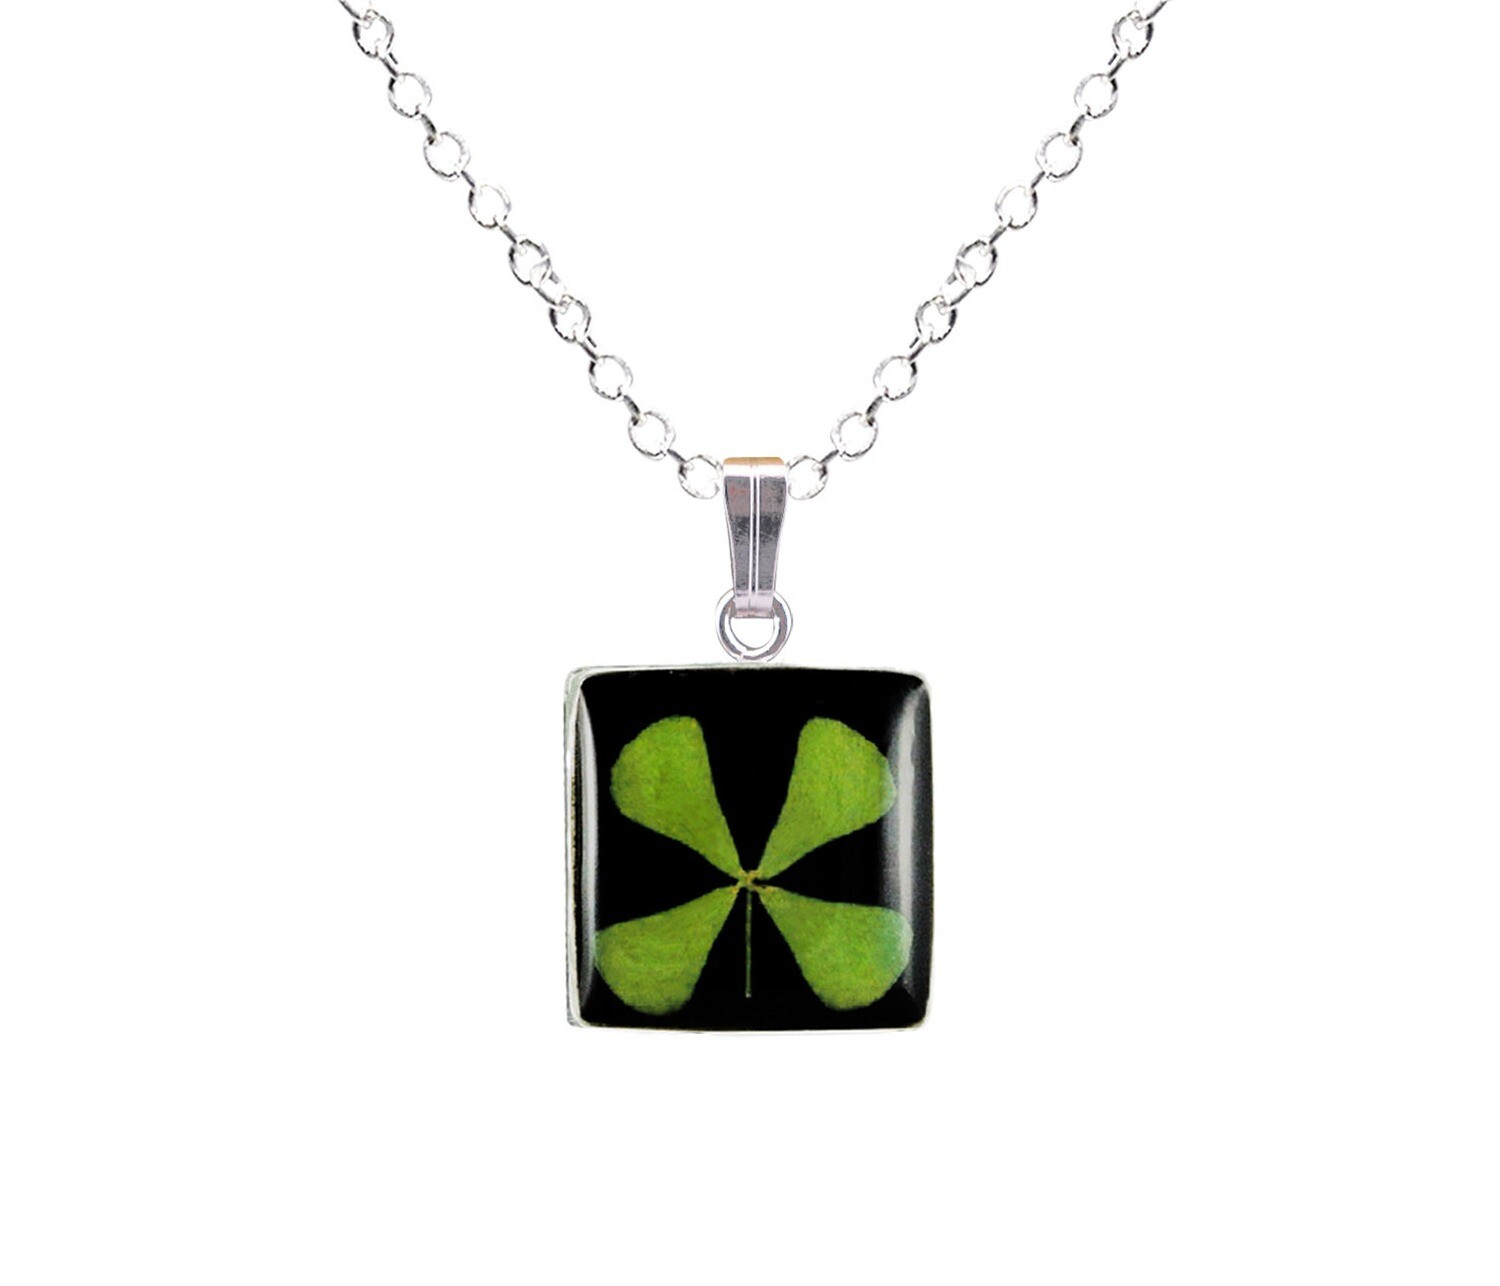 Clover Necklace, Small Square, Black Background